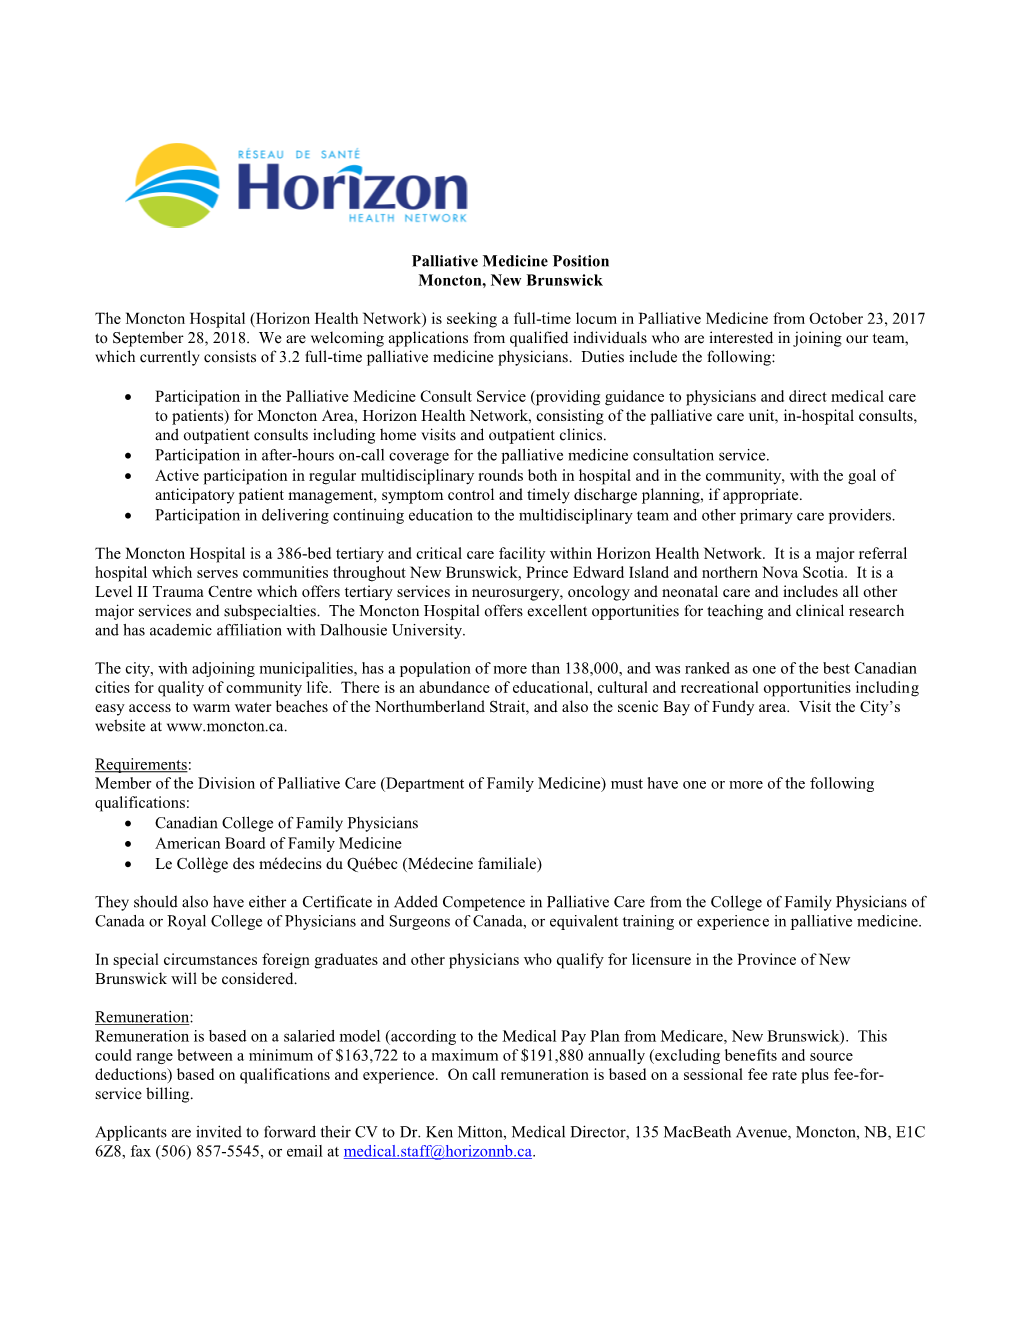 Horizon Health Network) Is Seeking a Full-Time Locum in Palliative Medicine from October 23, 2017 to September 28, 2018